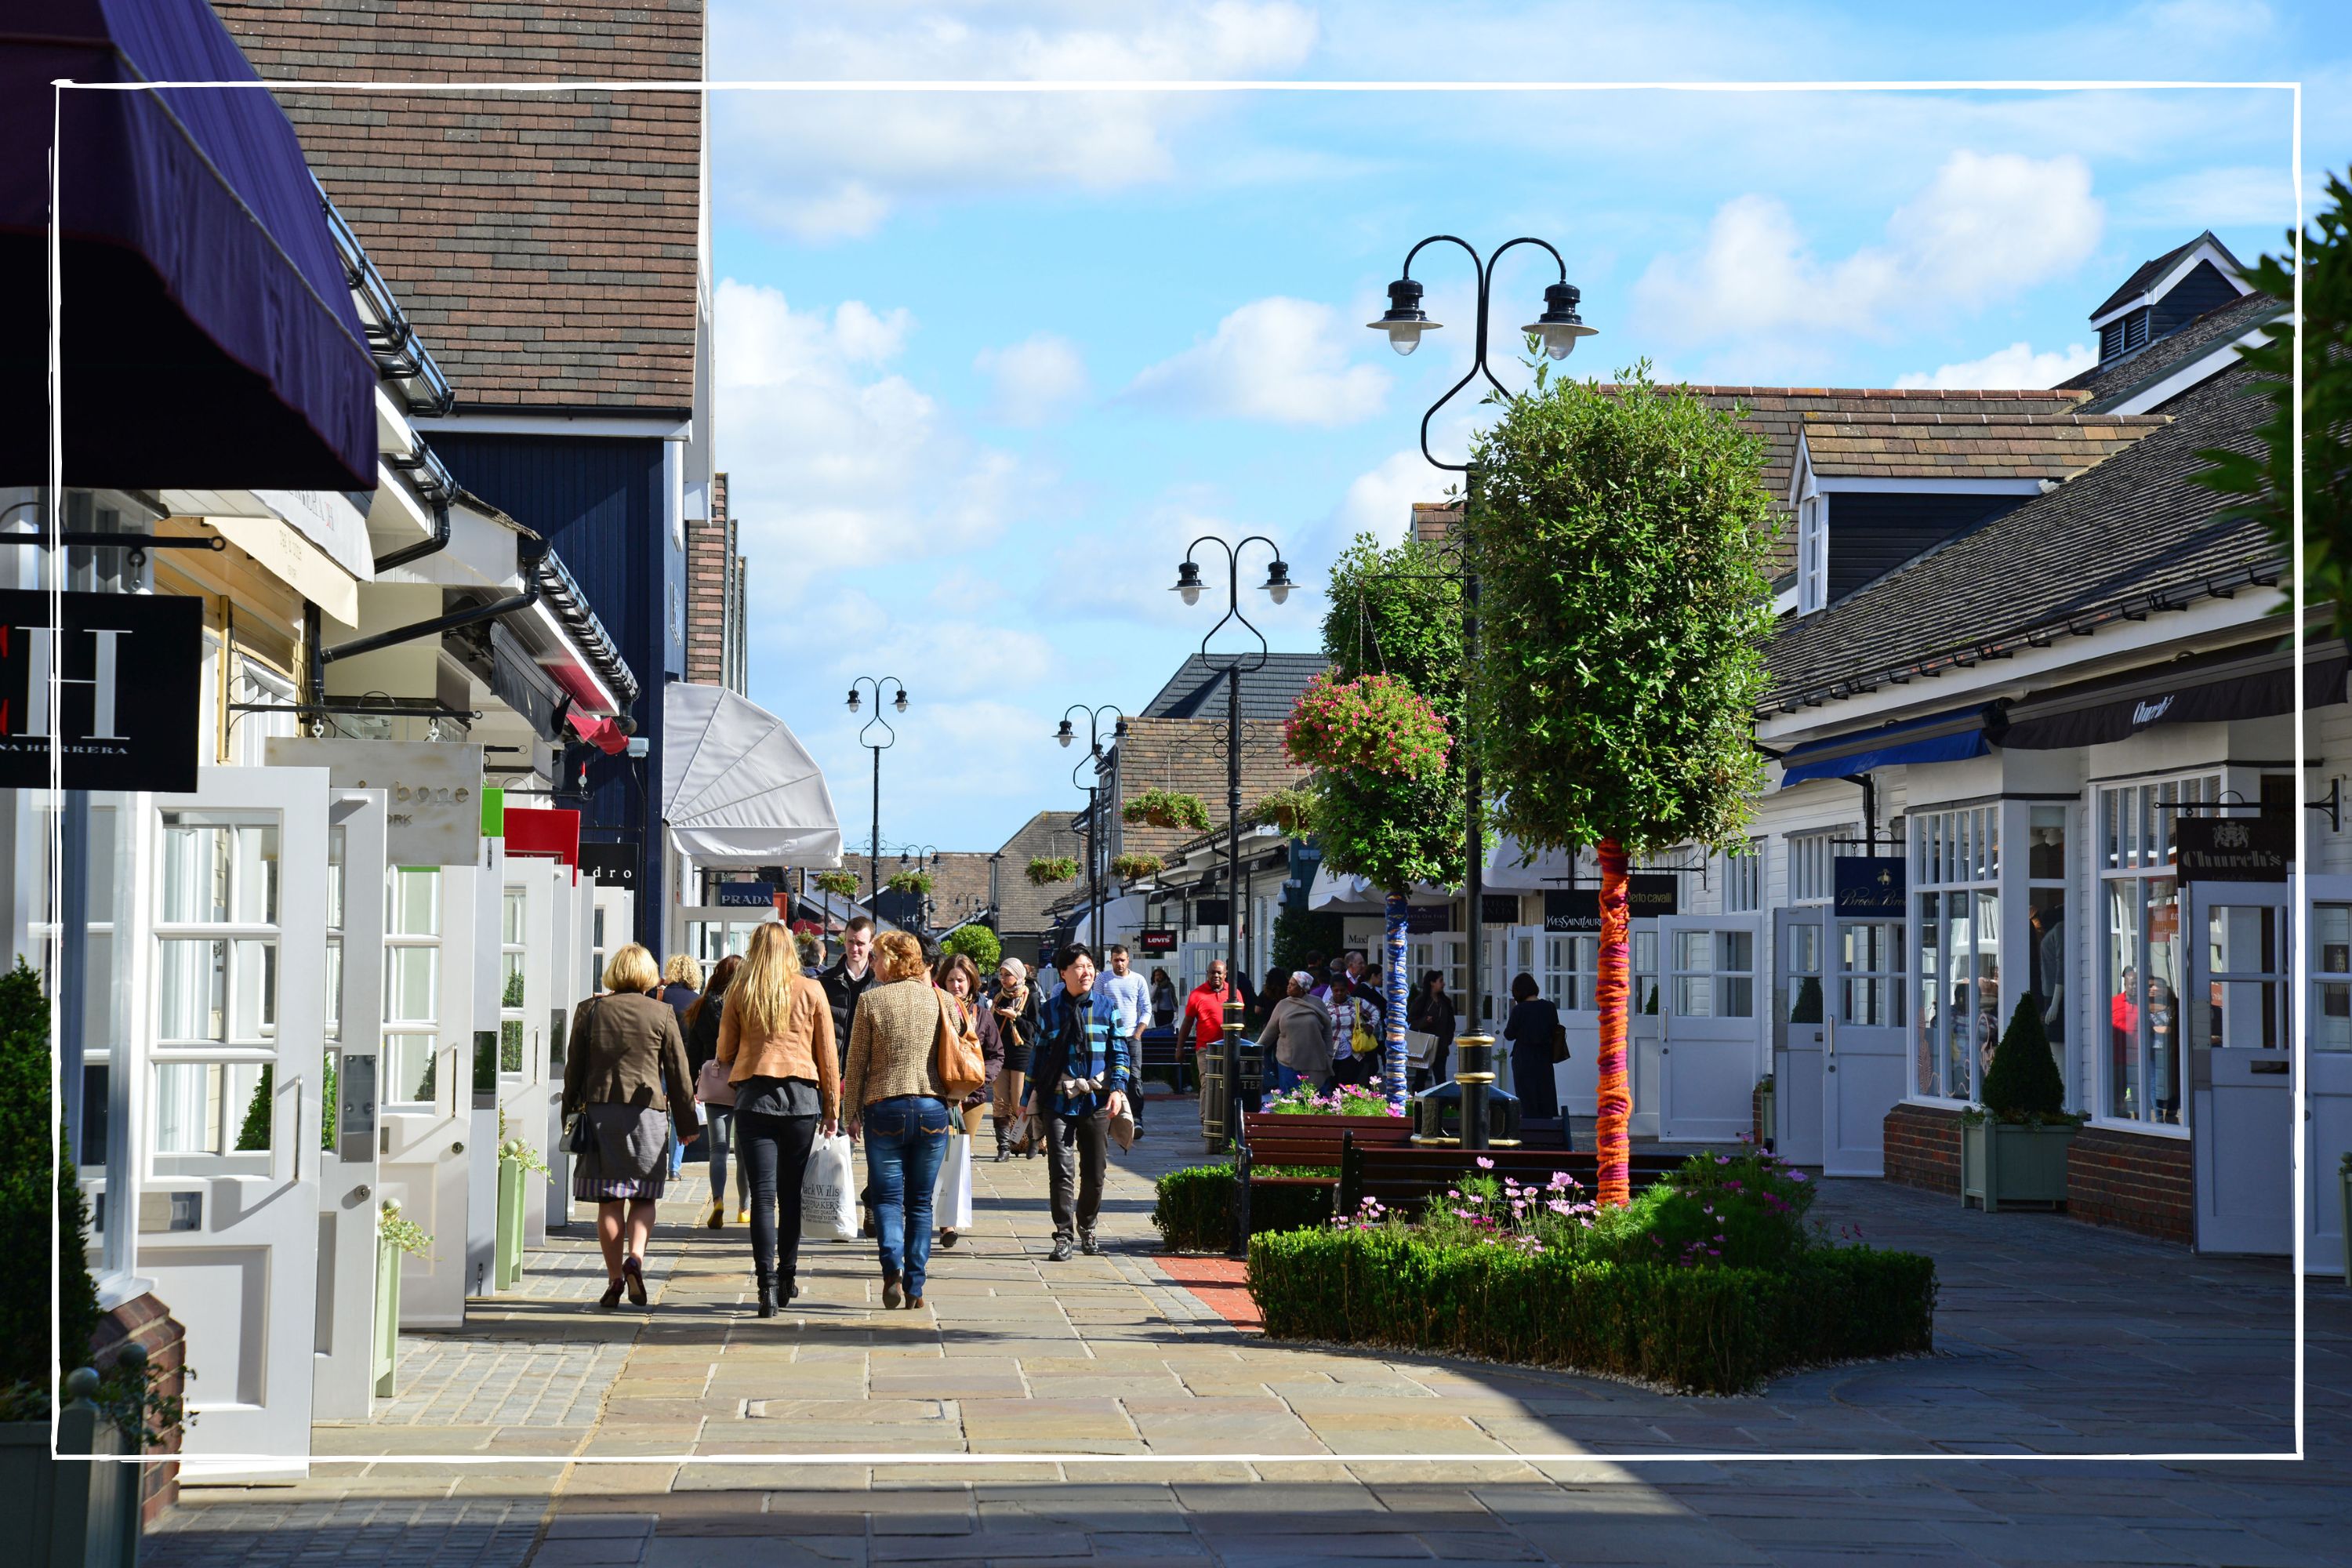 Strollers for shopping at Bicester Village with your pets